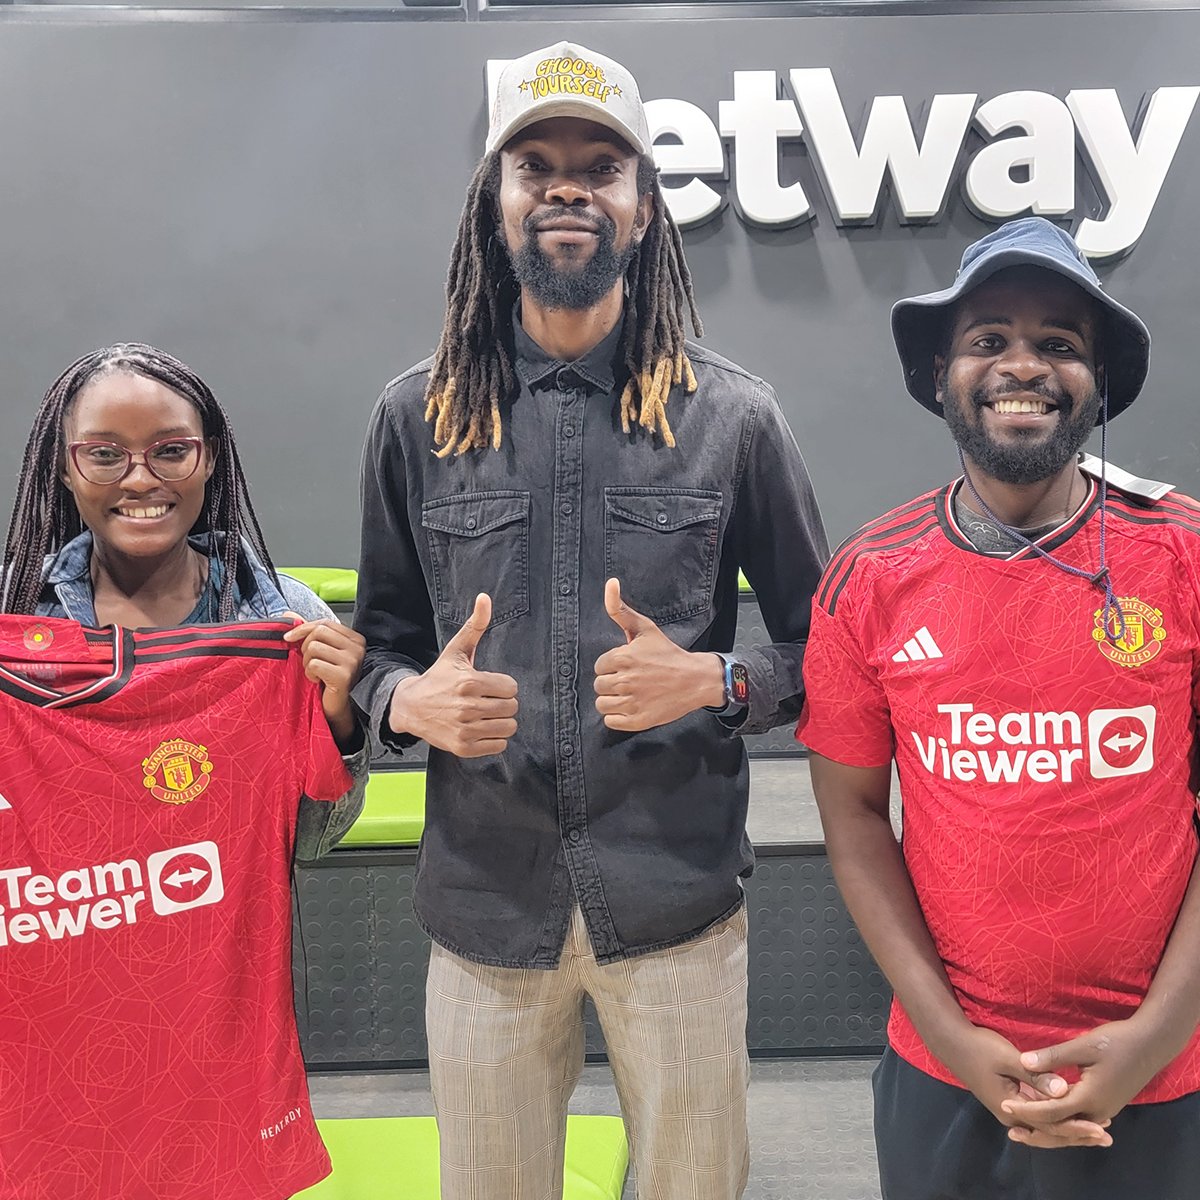 Betway ambassador @officialJayRox  dropped by to handout some Manchester United jerseys to a few lucky fans after their FA Cup win last weekend 🙌

#GetWayMore #BetwaySquad